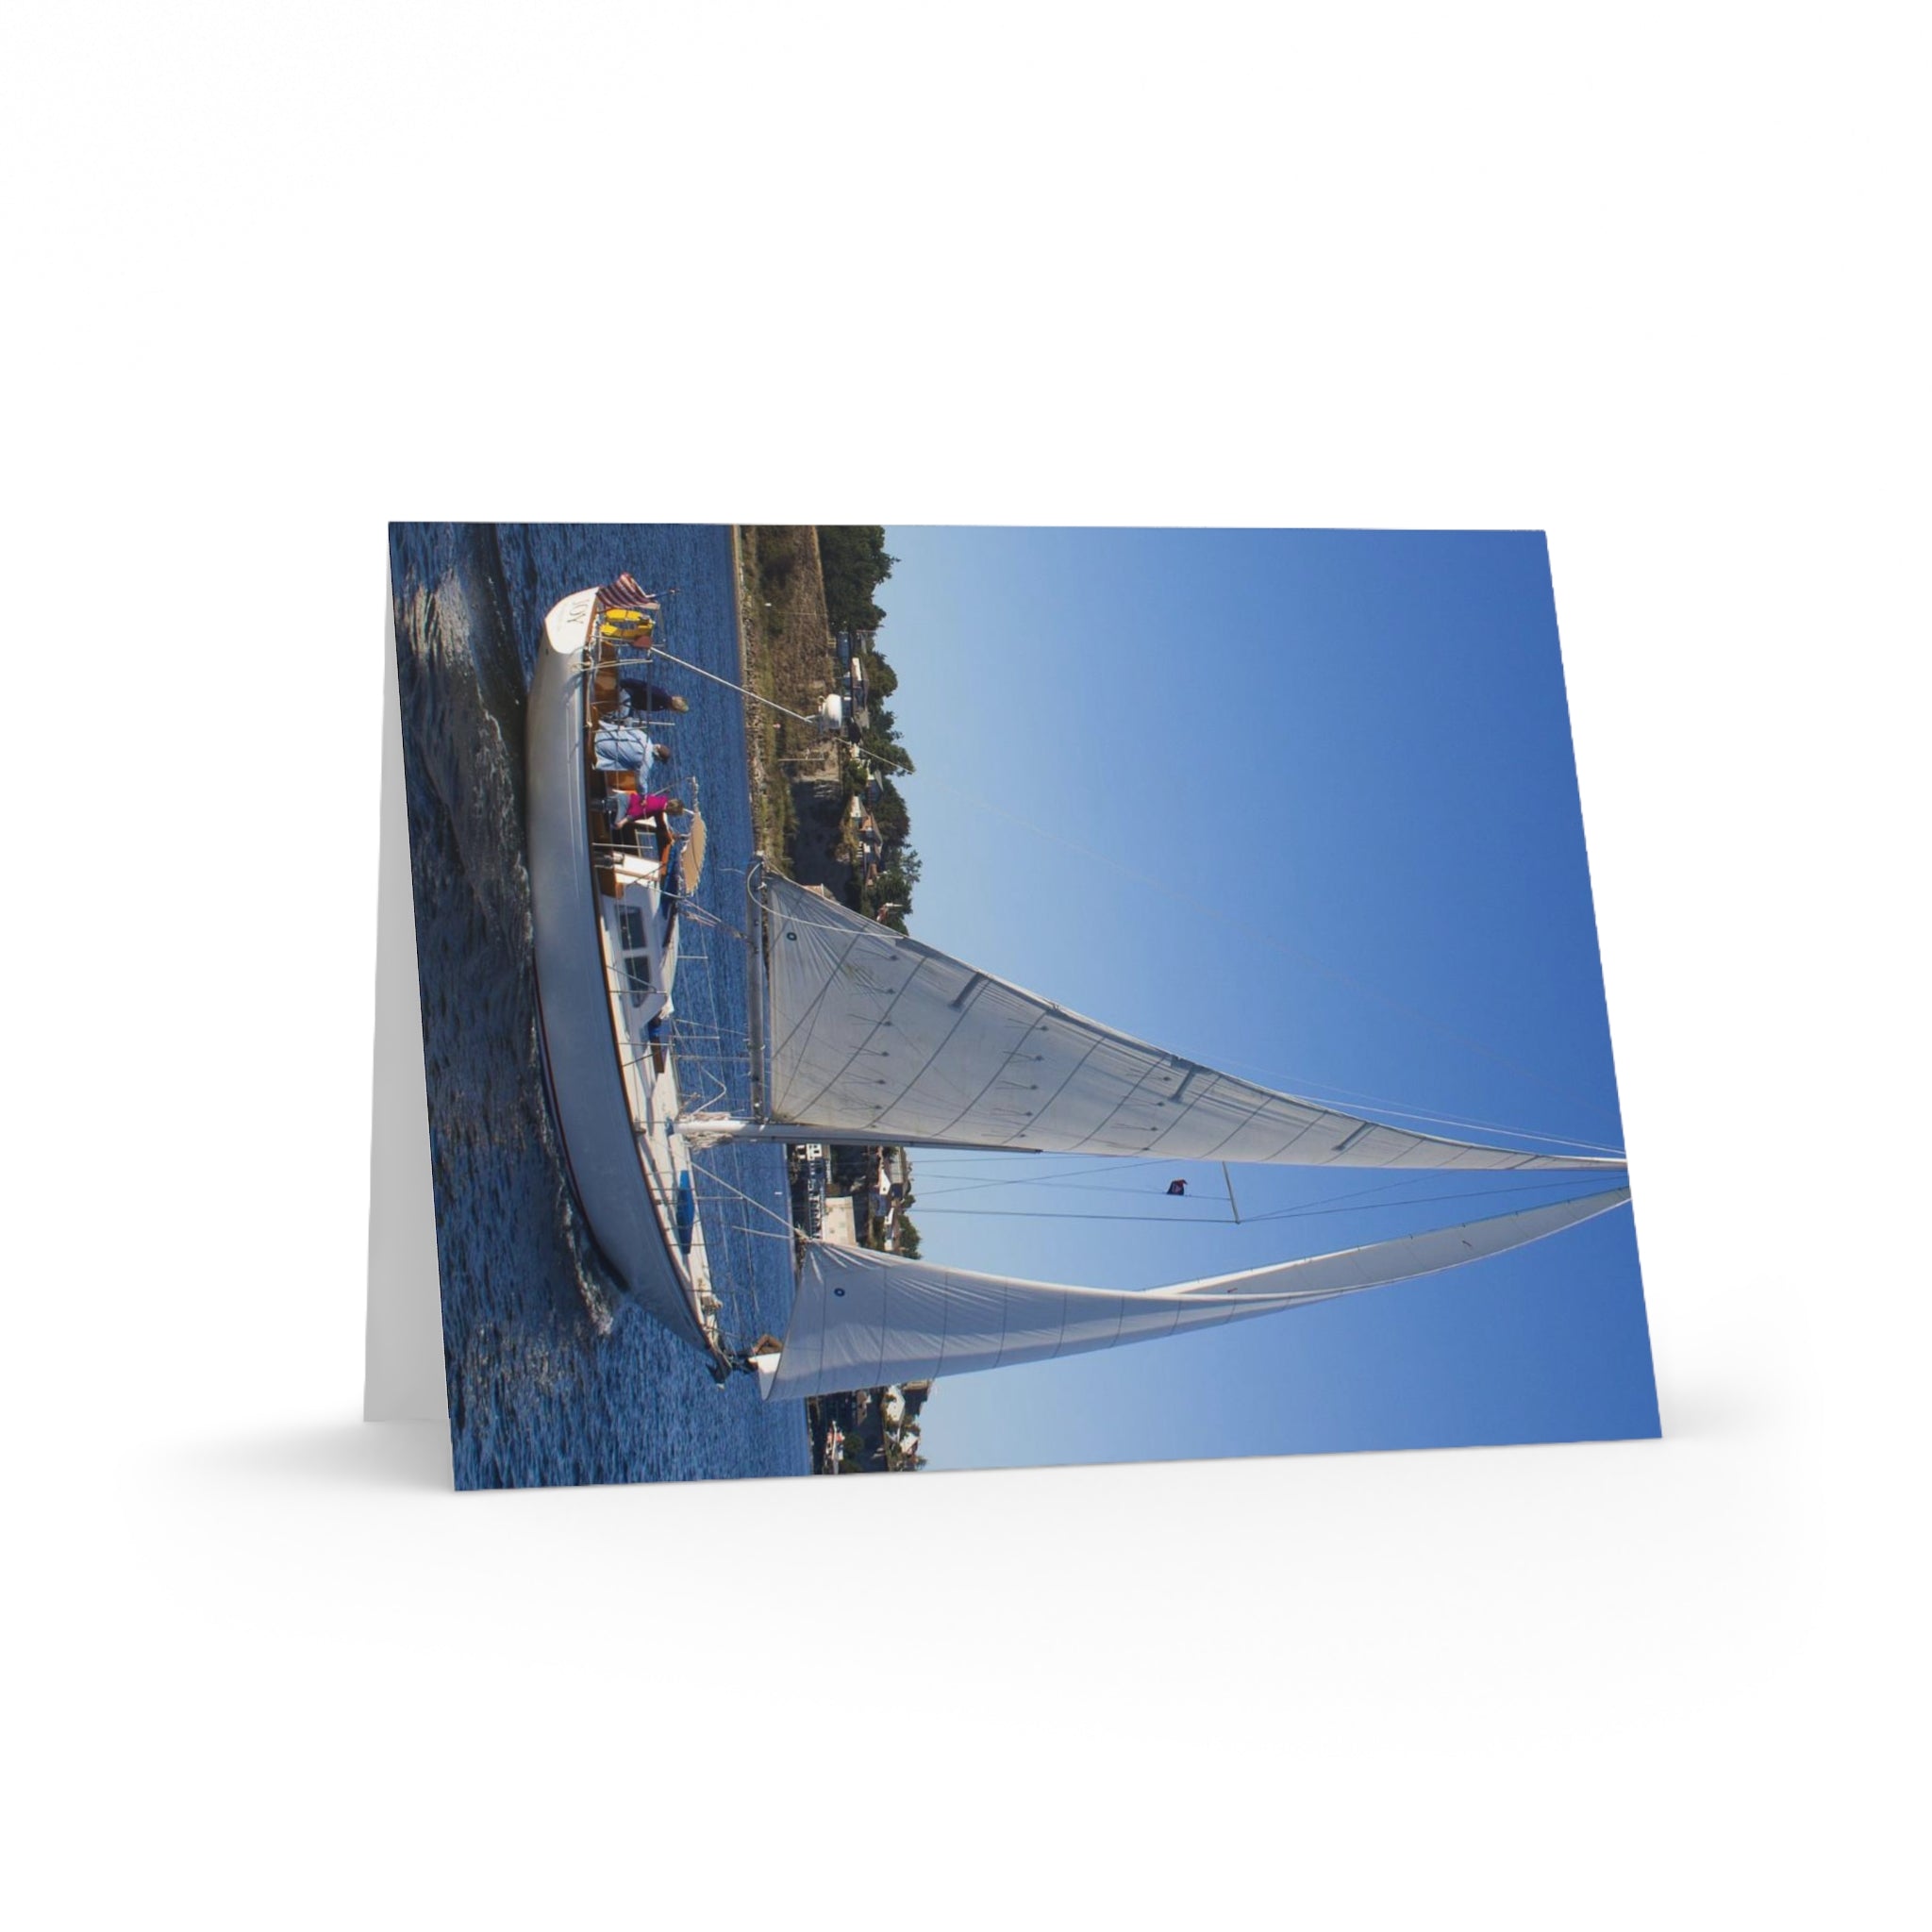 Sail & Sea Note Cards: All Occasion Nautical Inspired Greeting Cards with Envelopes Included (8 pcs)